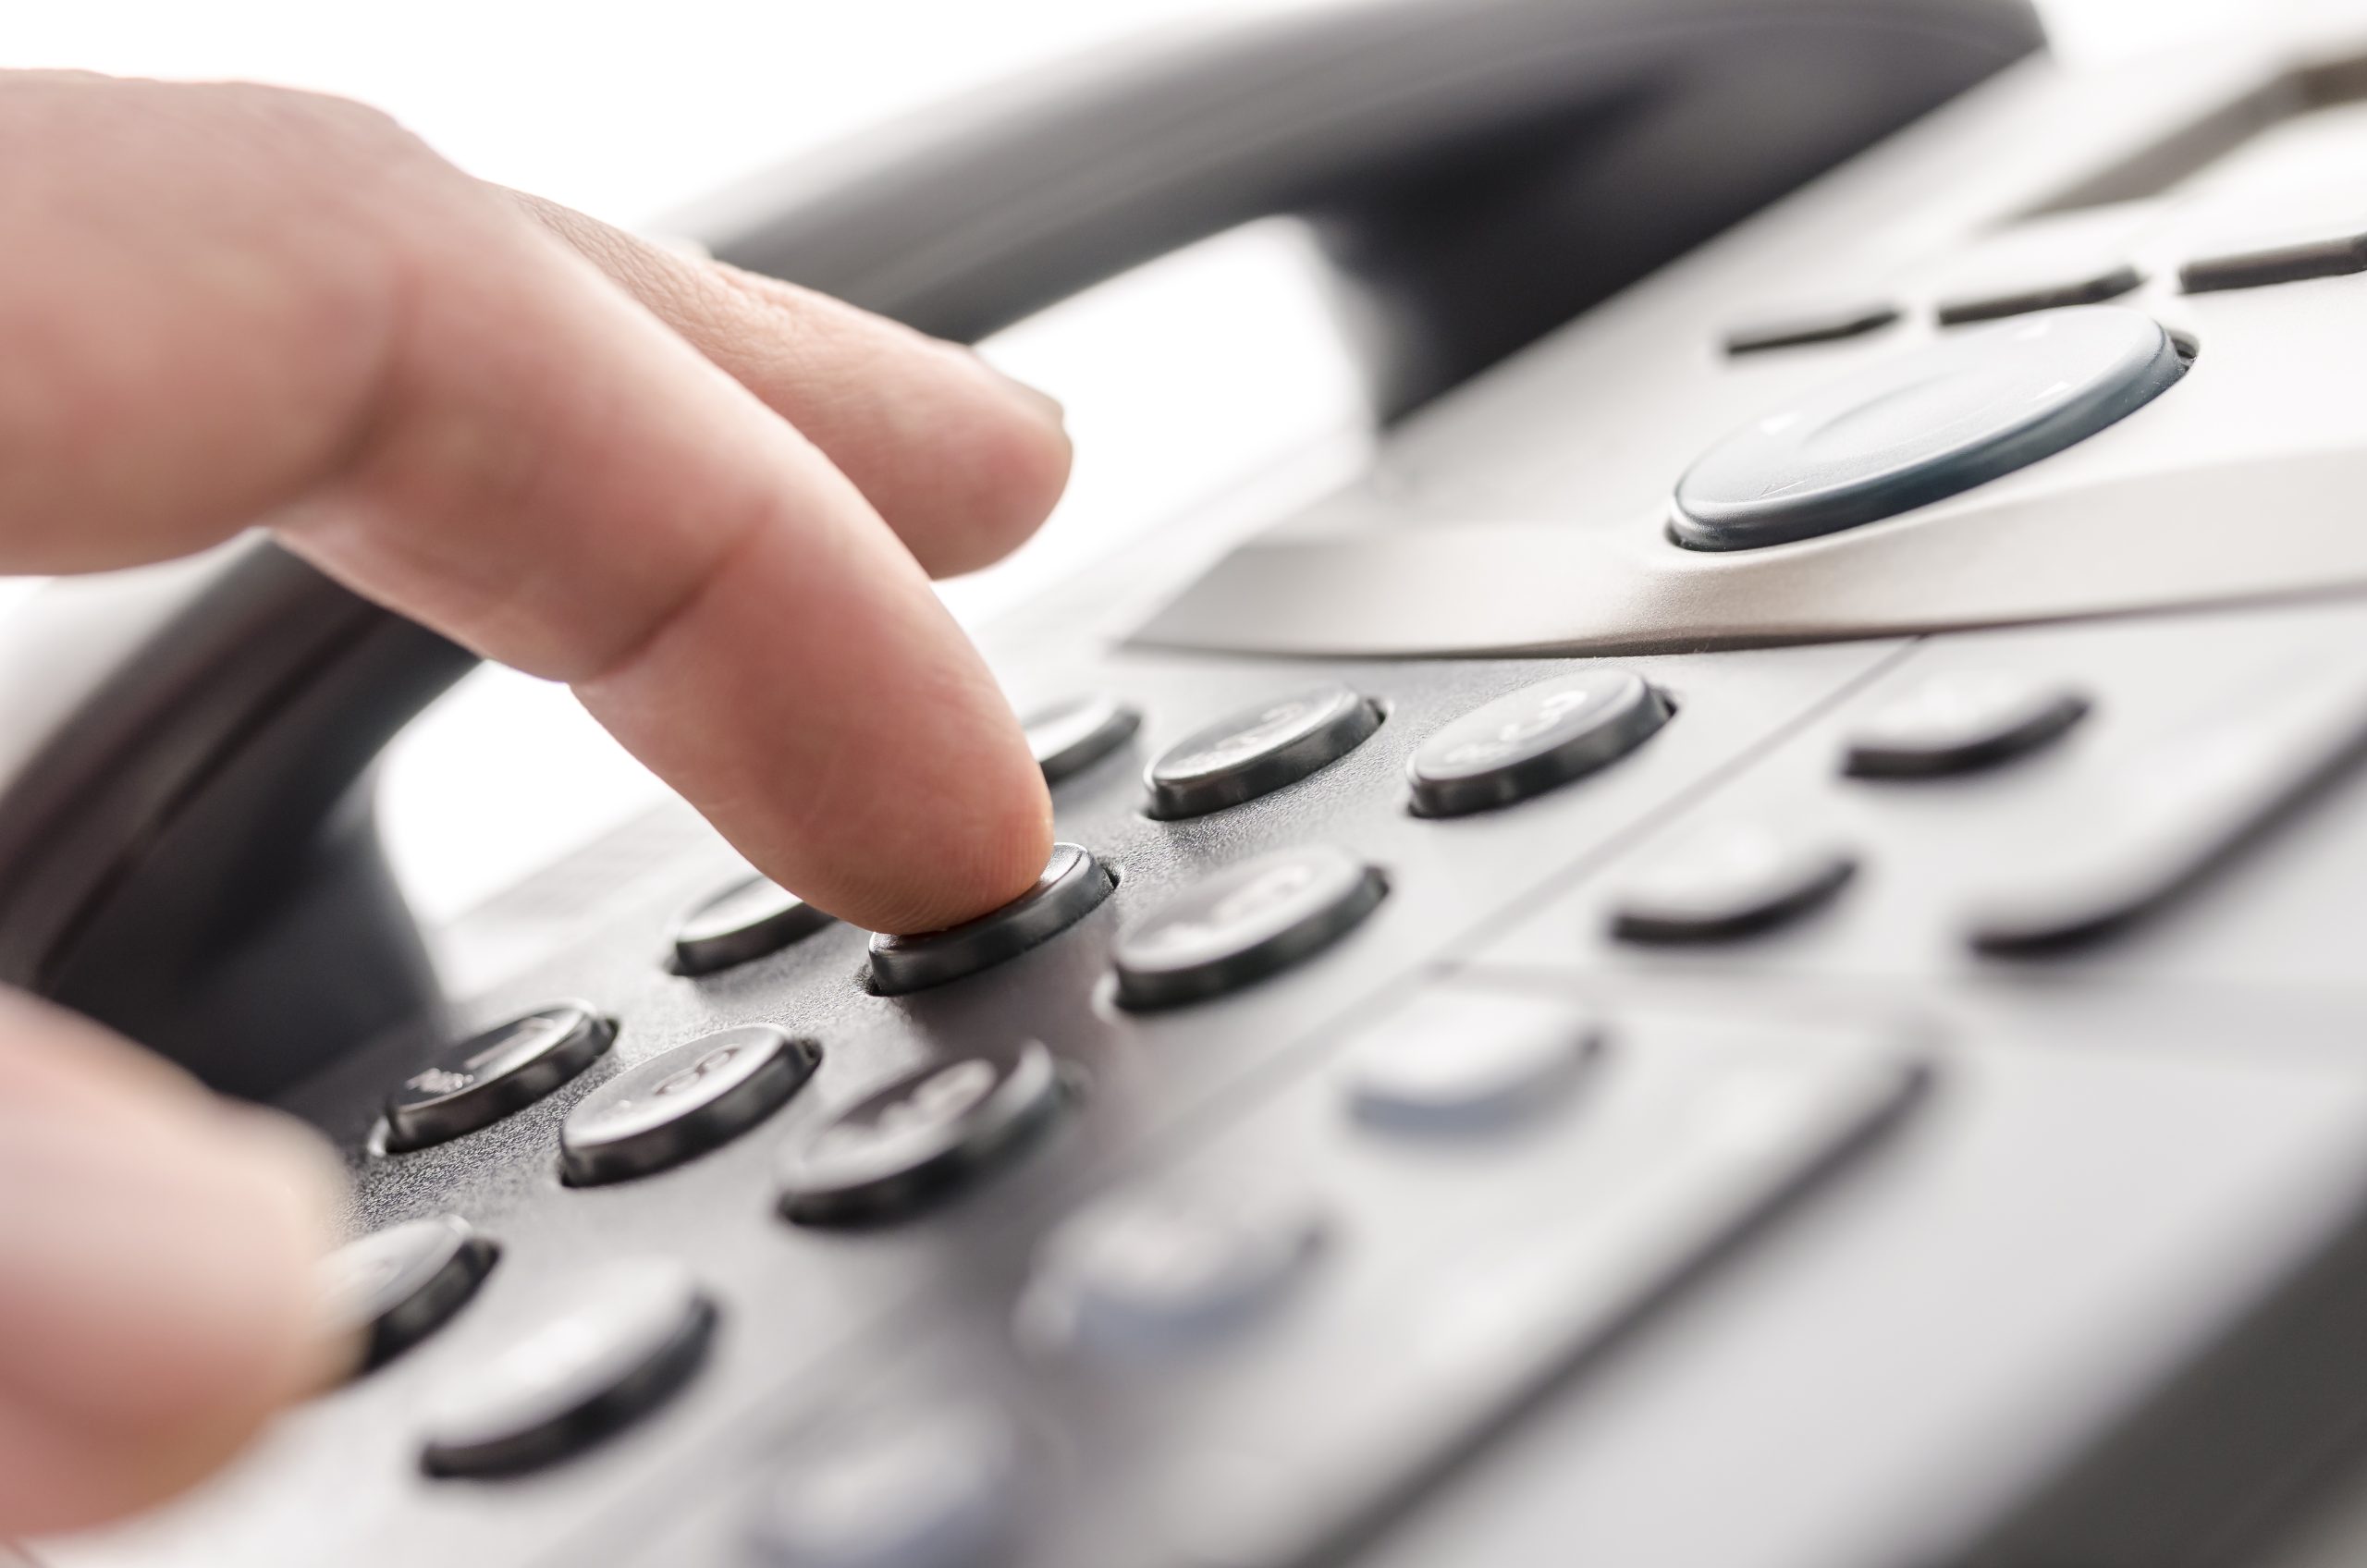 VoIP – The Future of Communication